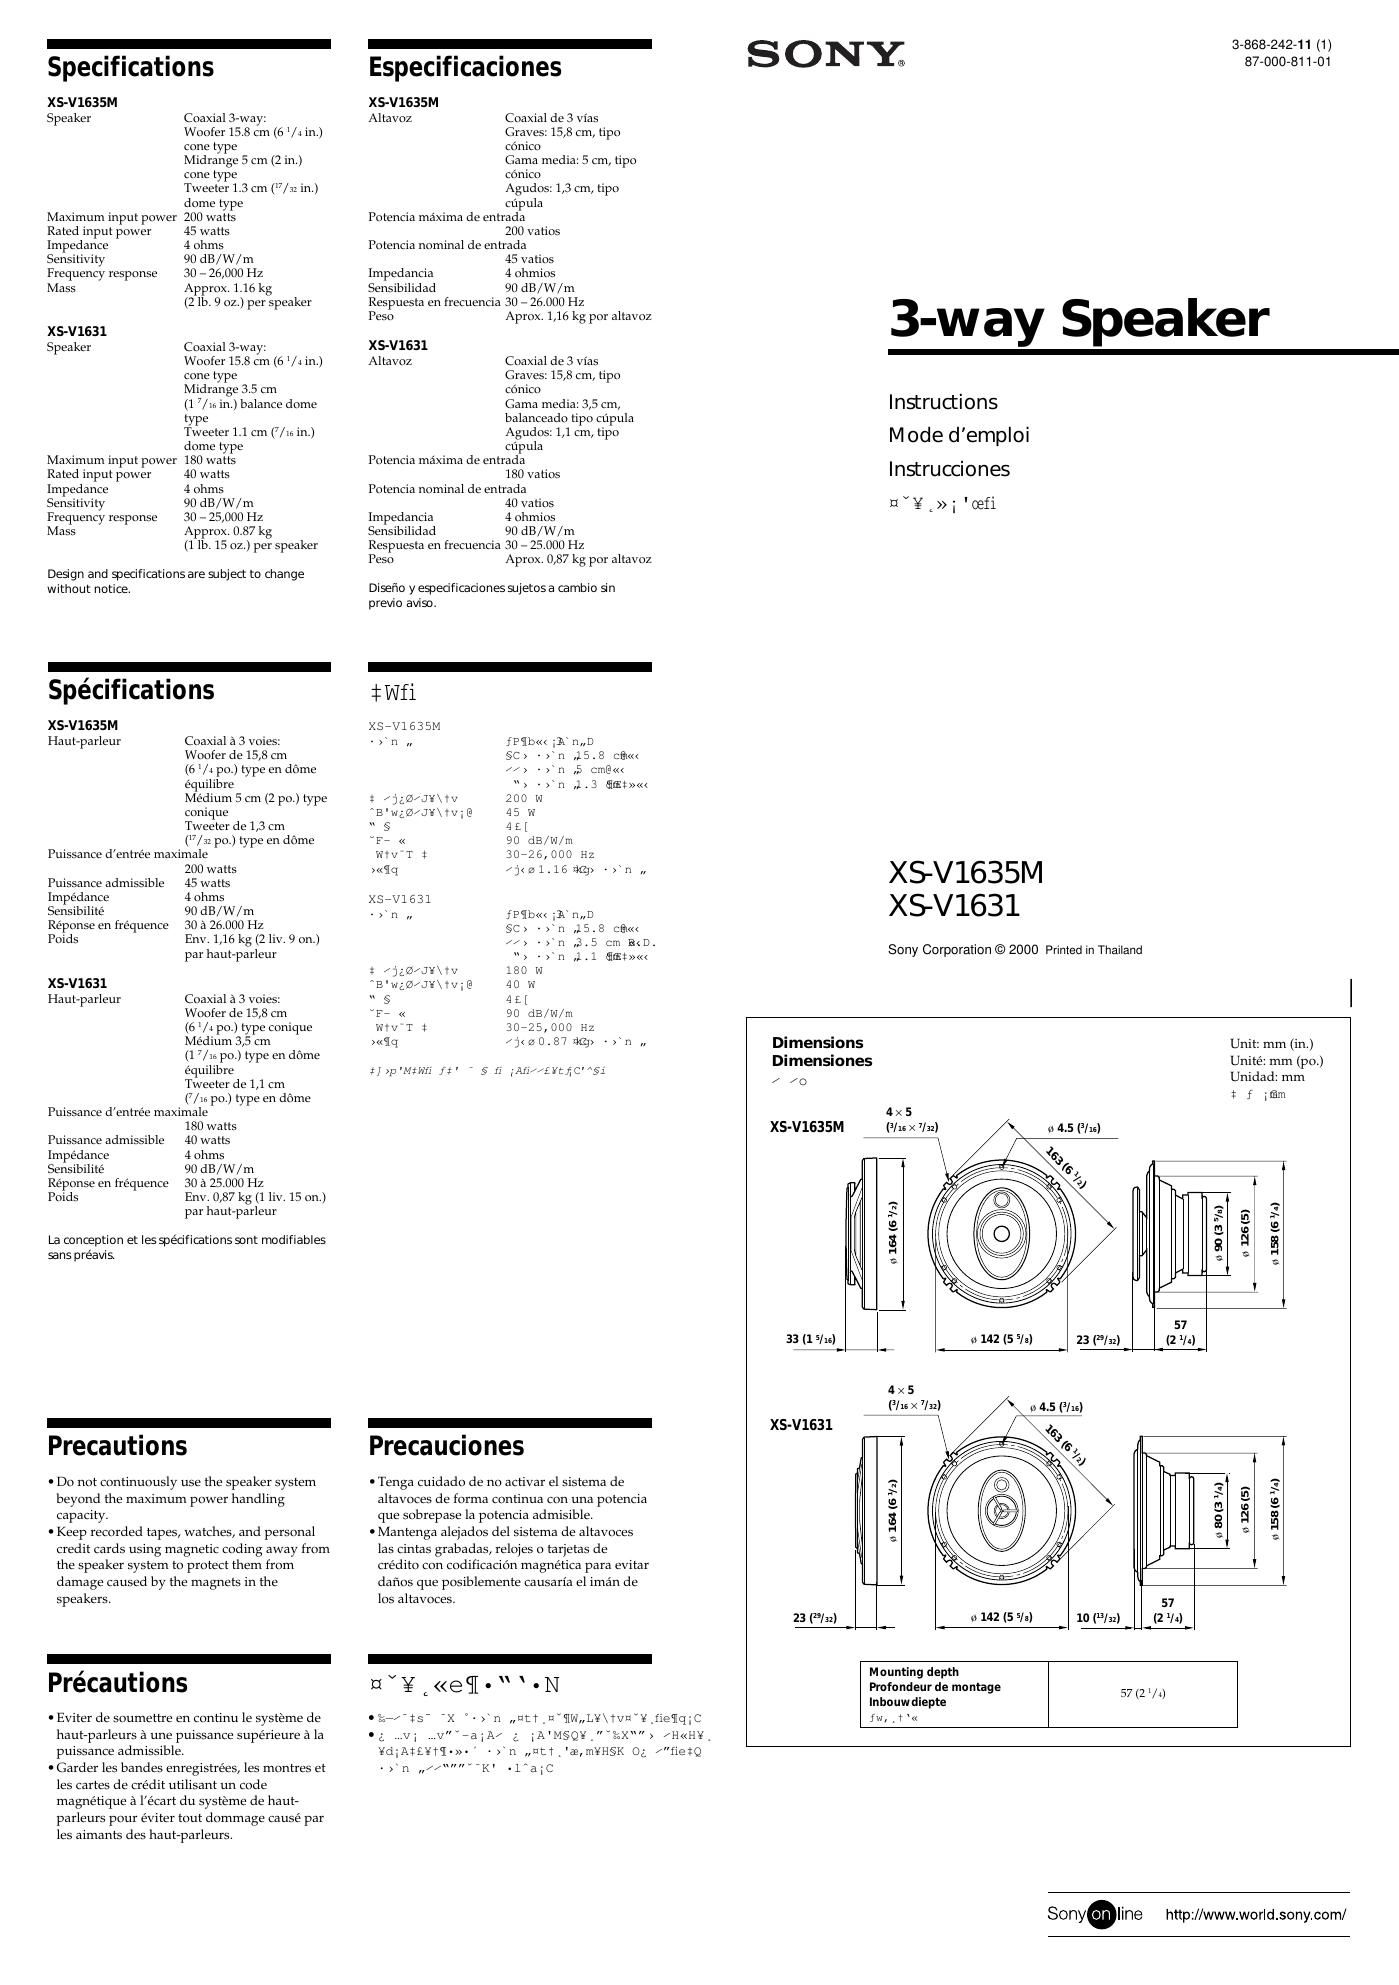 sony xs v 1635 m owners manual